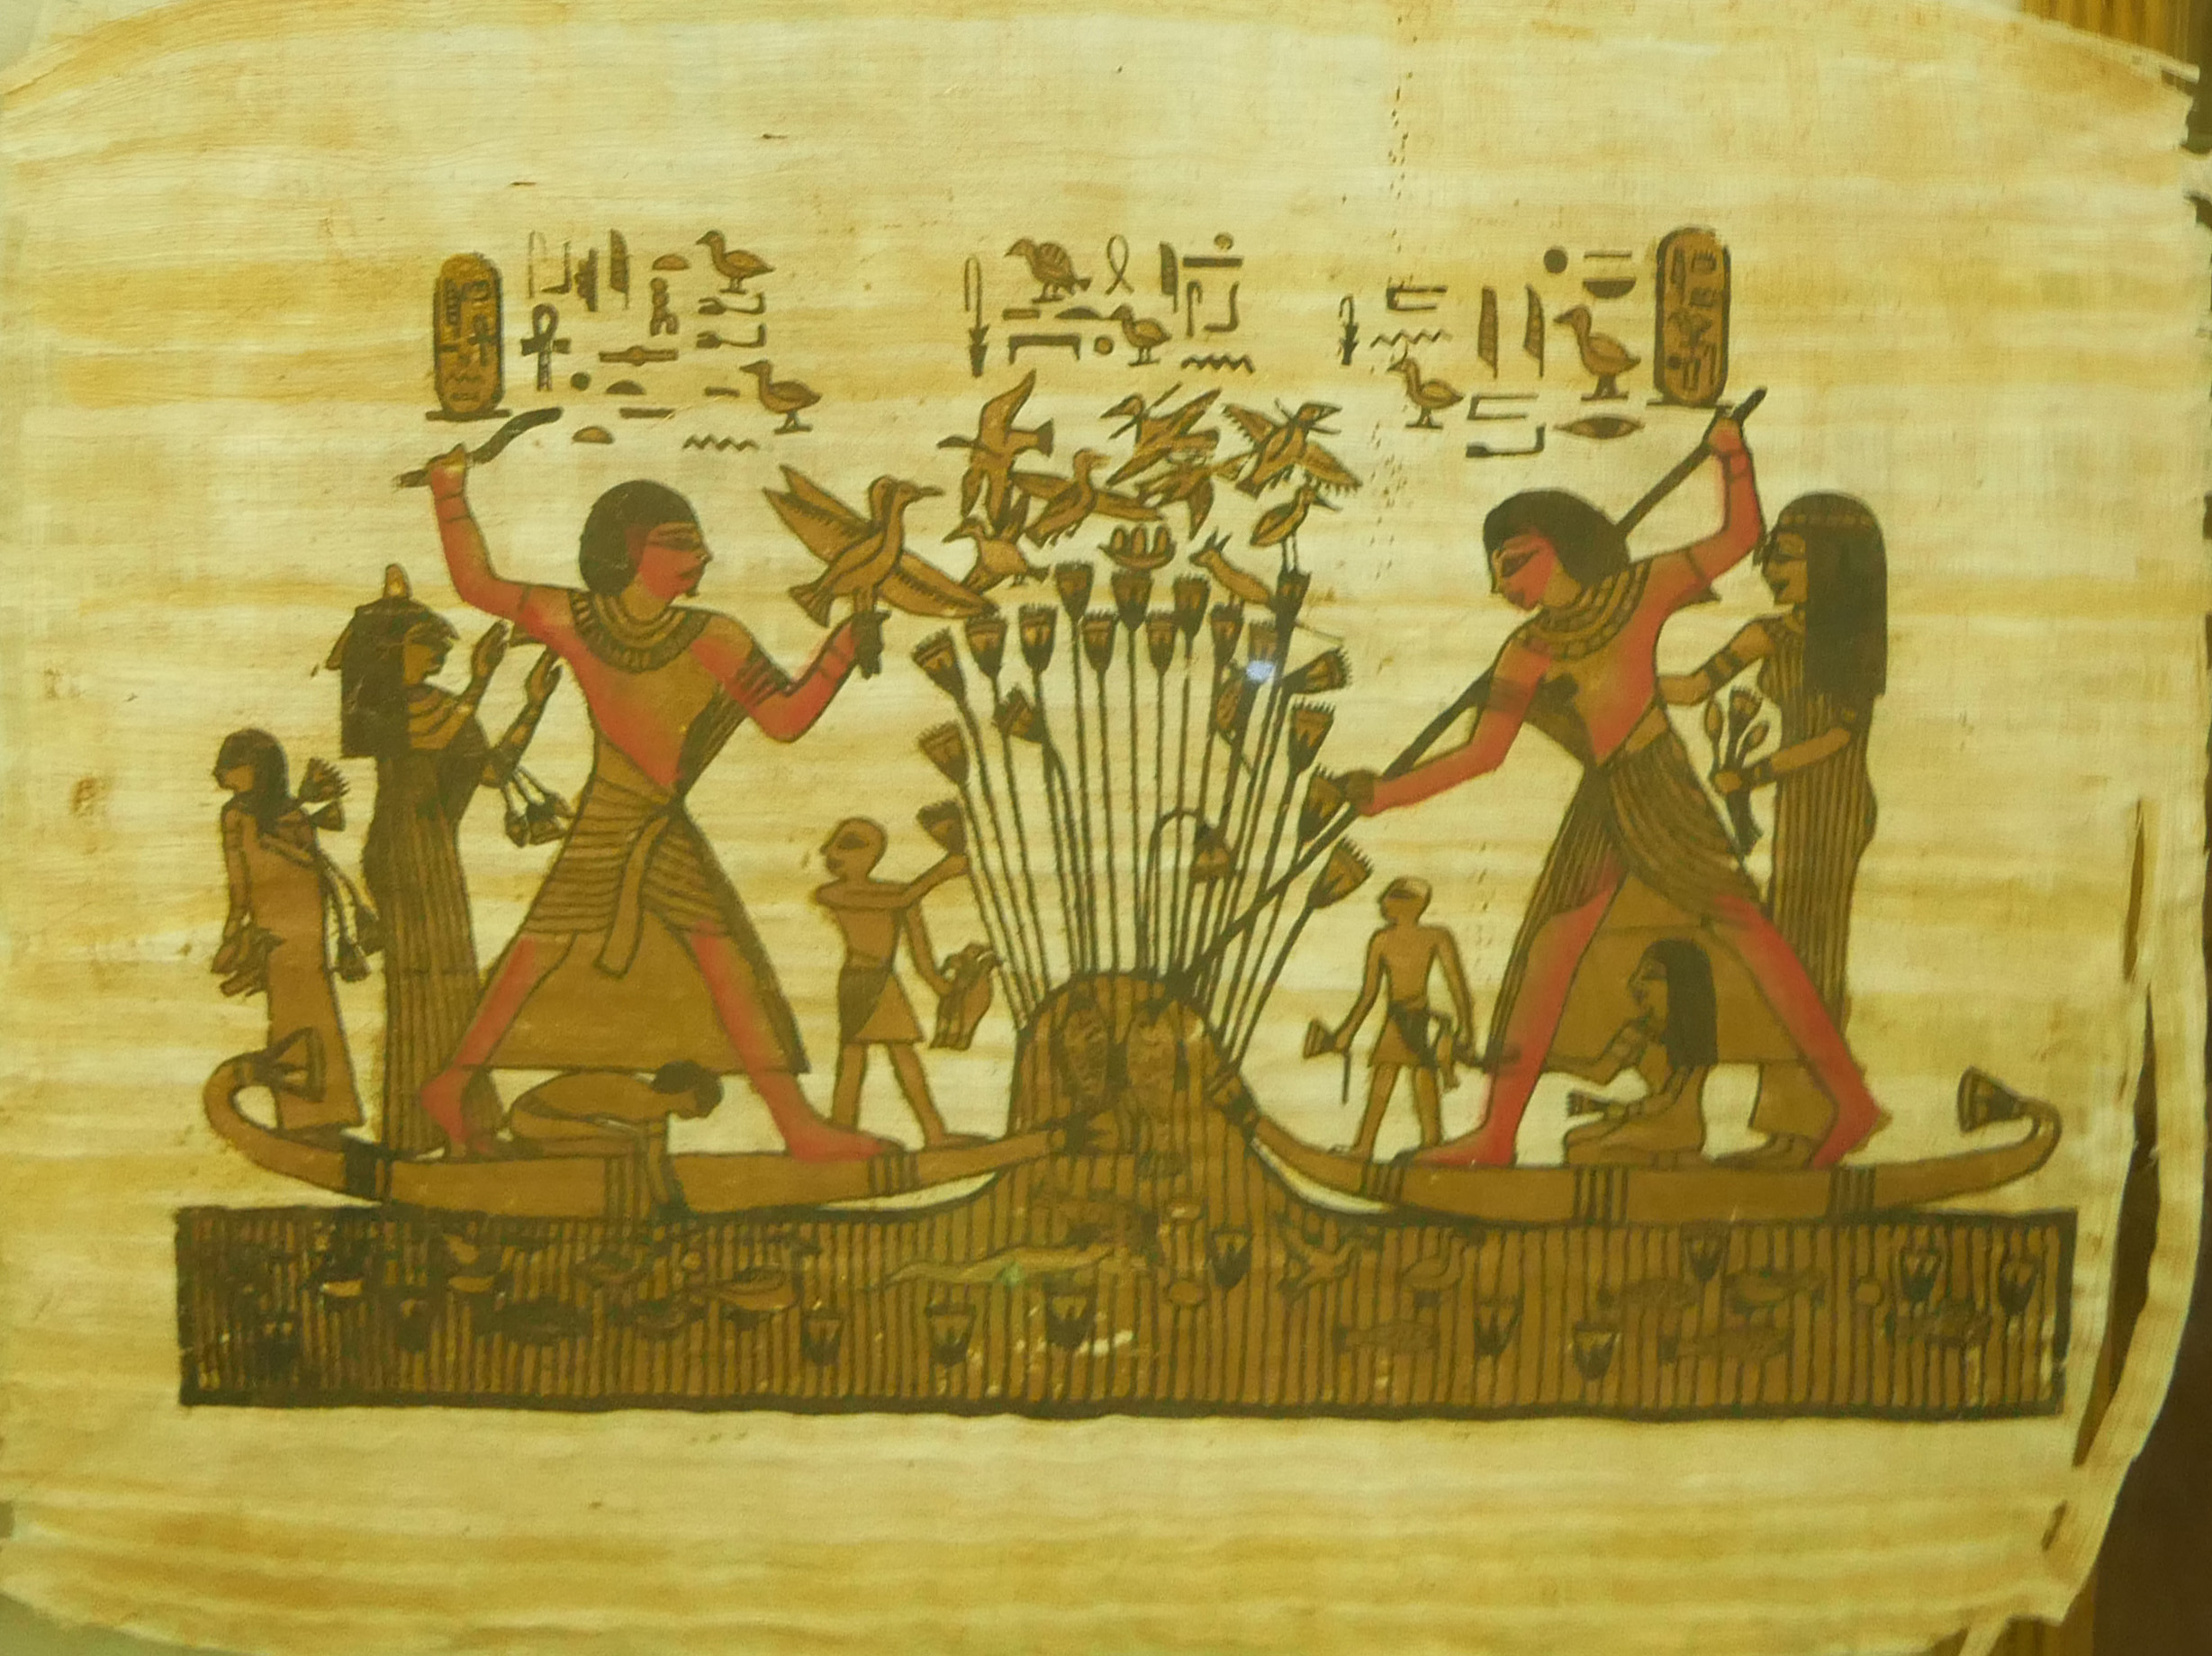 TWO EGYPTIAN FIGURAL PAPYRUS PAINTINGS Feature Pharaohs and a harvesting scene, together with